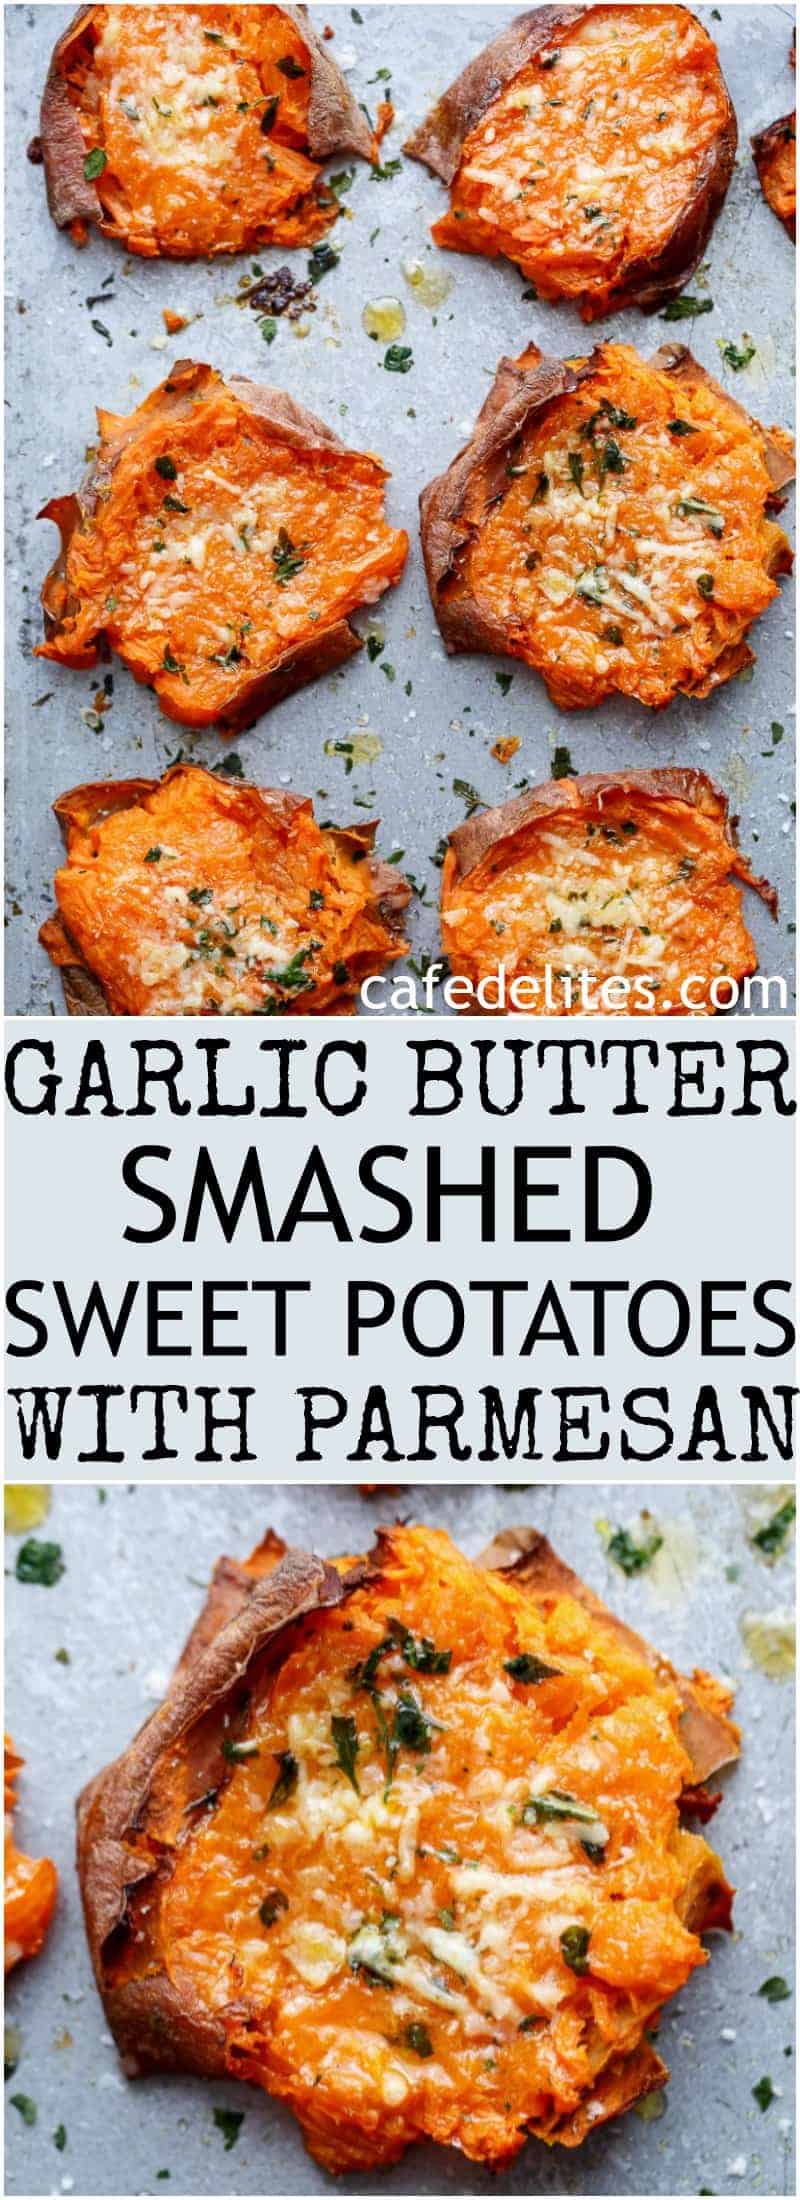 Garlic Butter Smashed Sweet Potatoes With Parmesan Cheese are crispy and buttery on the outside, while soft and sweet on the inside, making way for one of the best ways to eat a sweet potato! | https://cafedelites.com